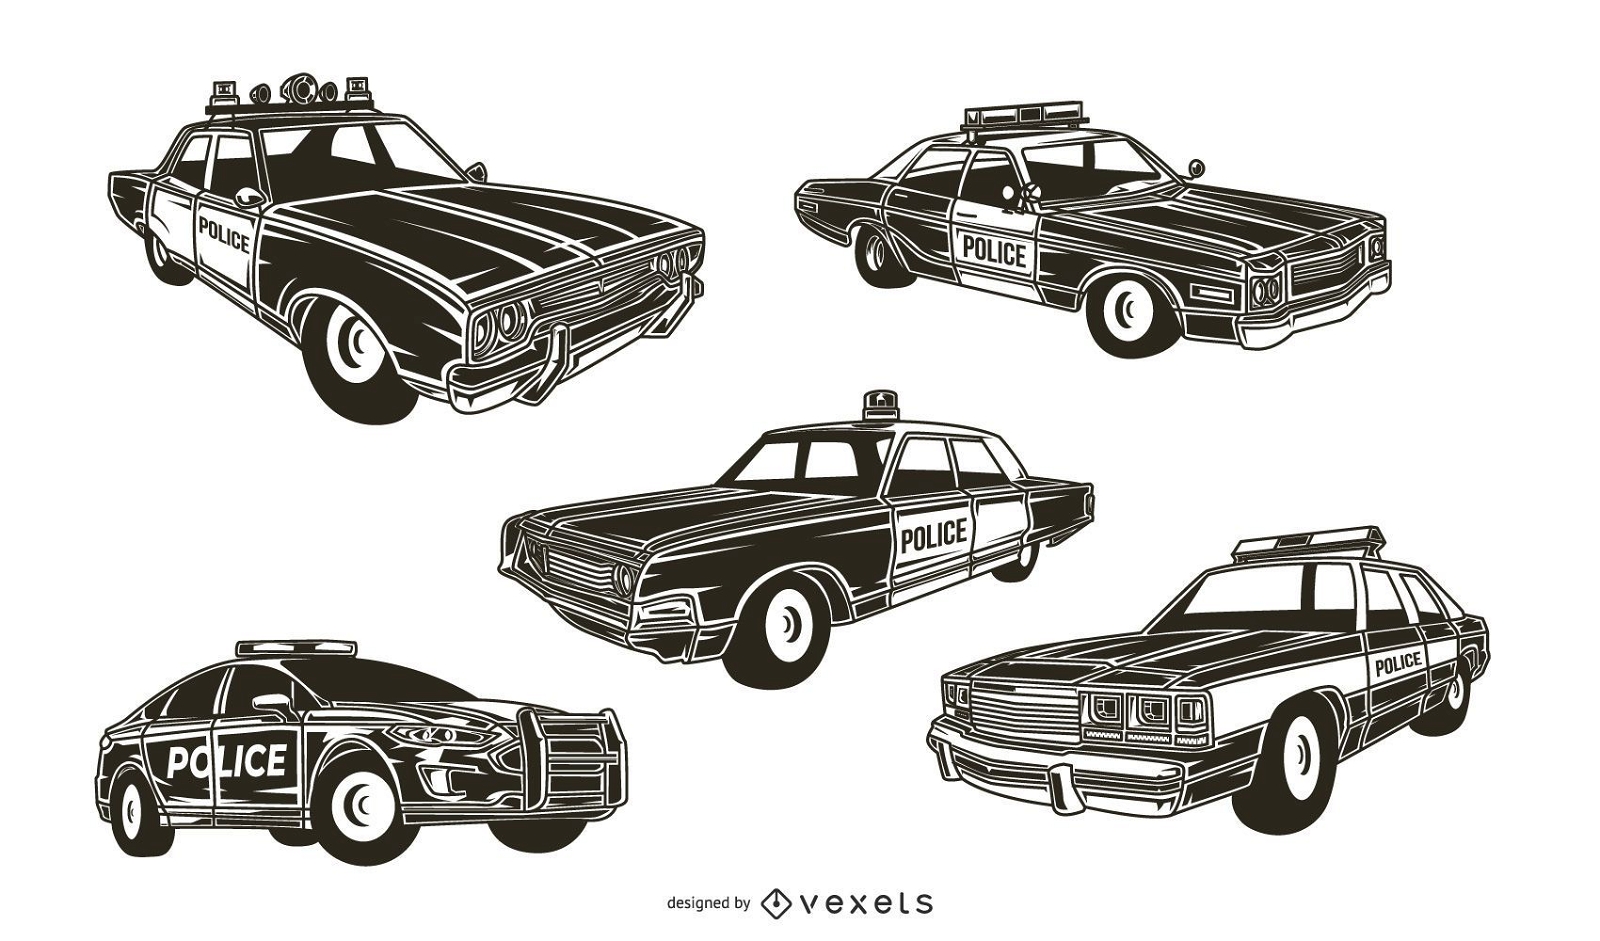 Police Car Vintage Us American Police Stock Vector (Royalty Free)  2011576853 | Shutterstock